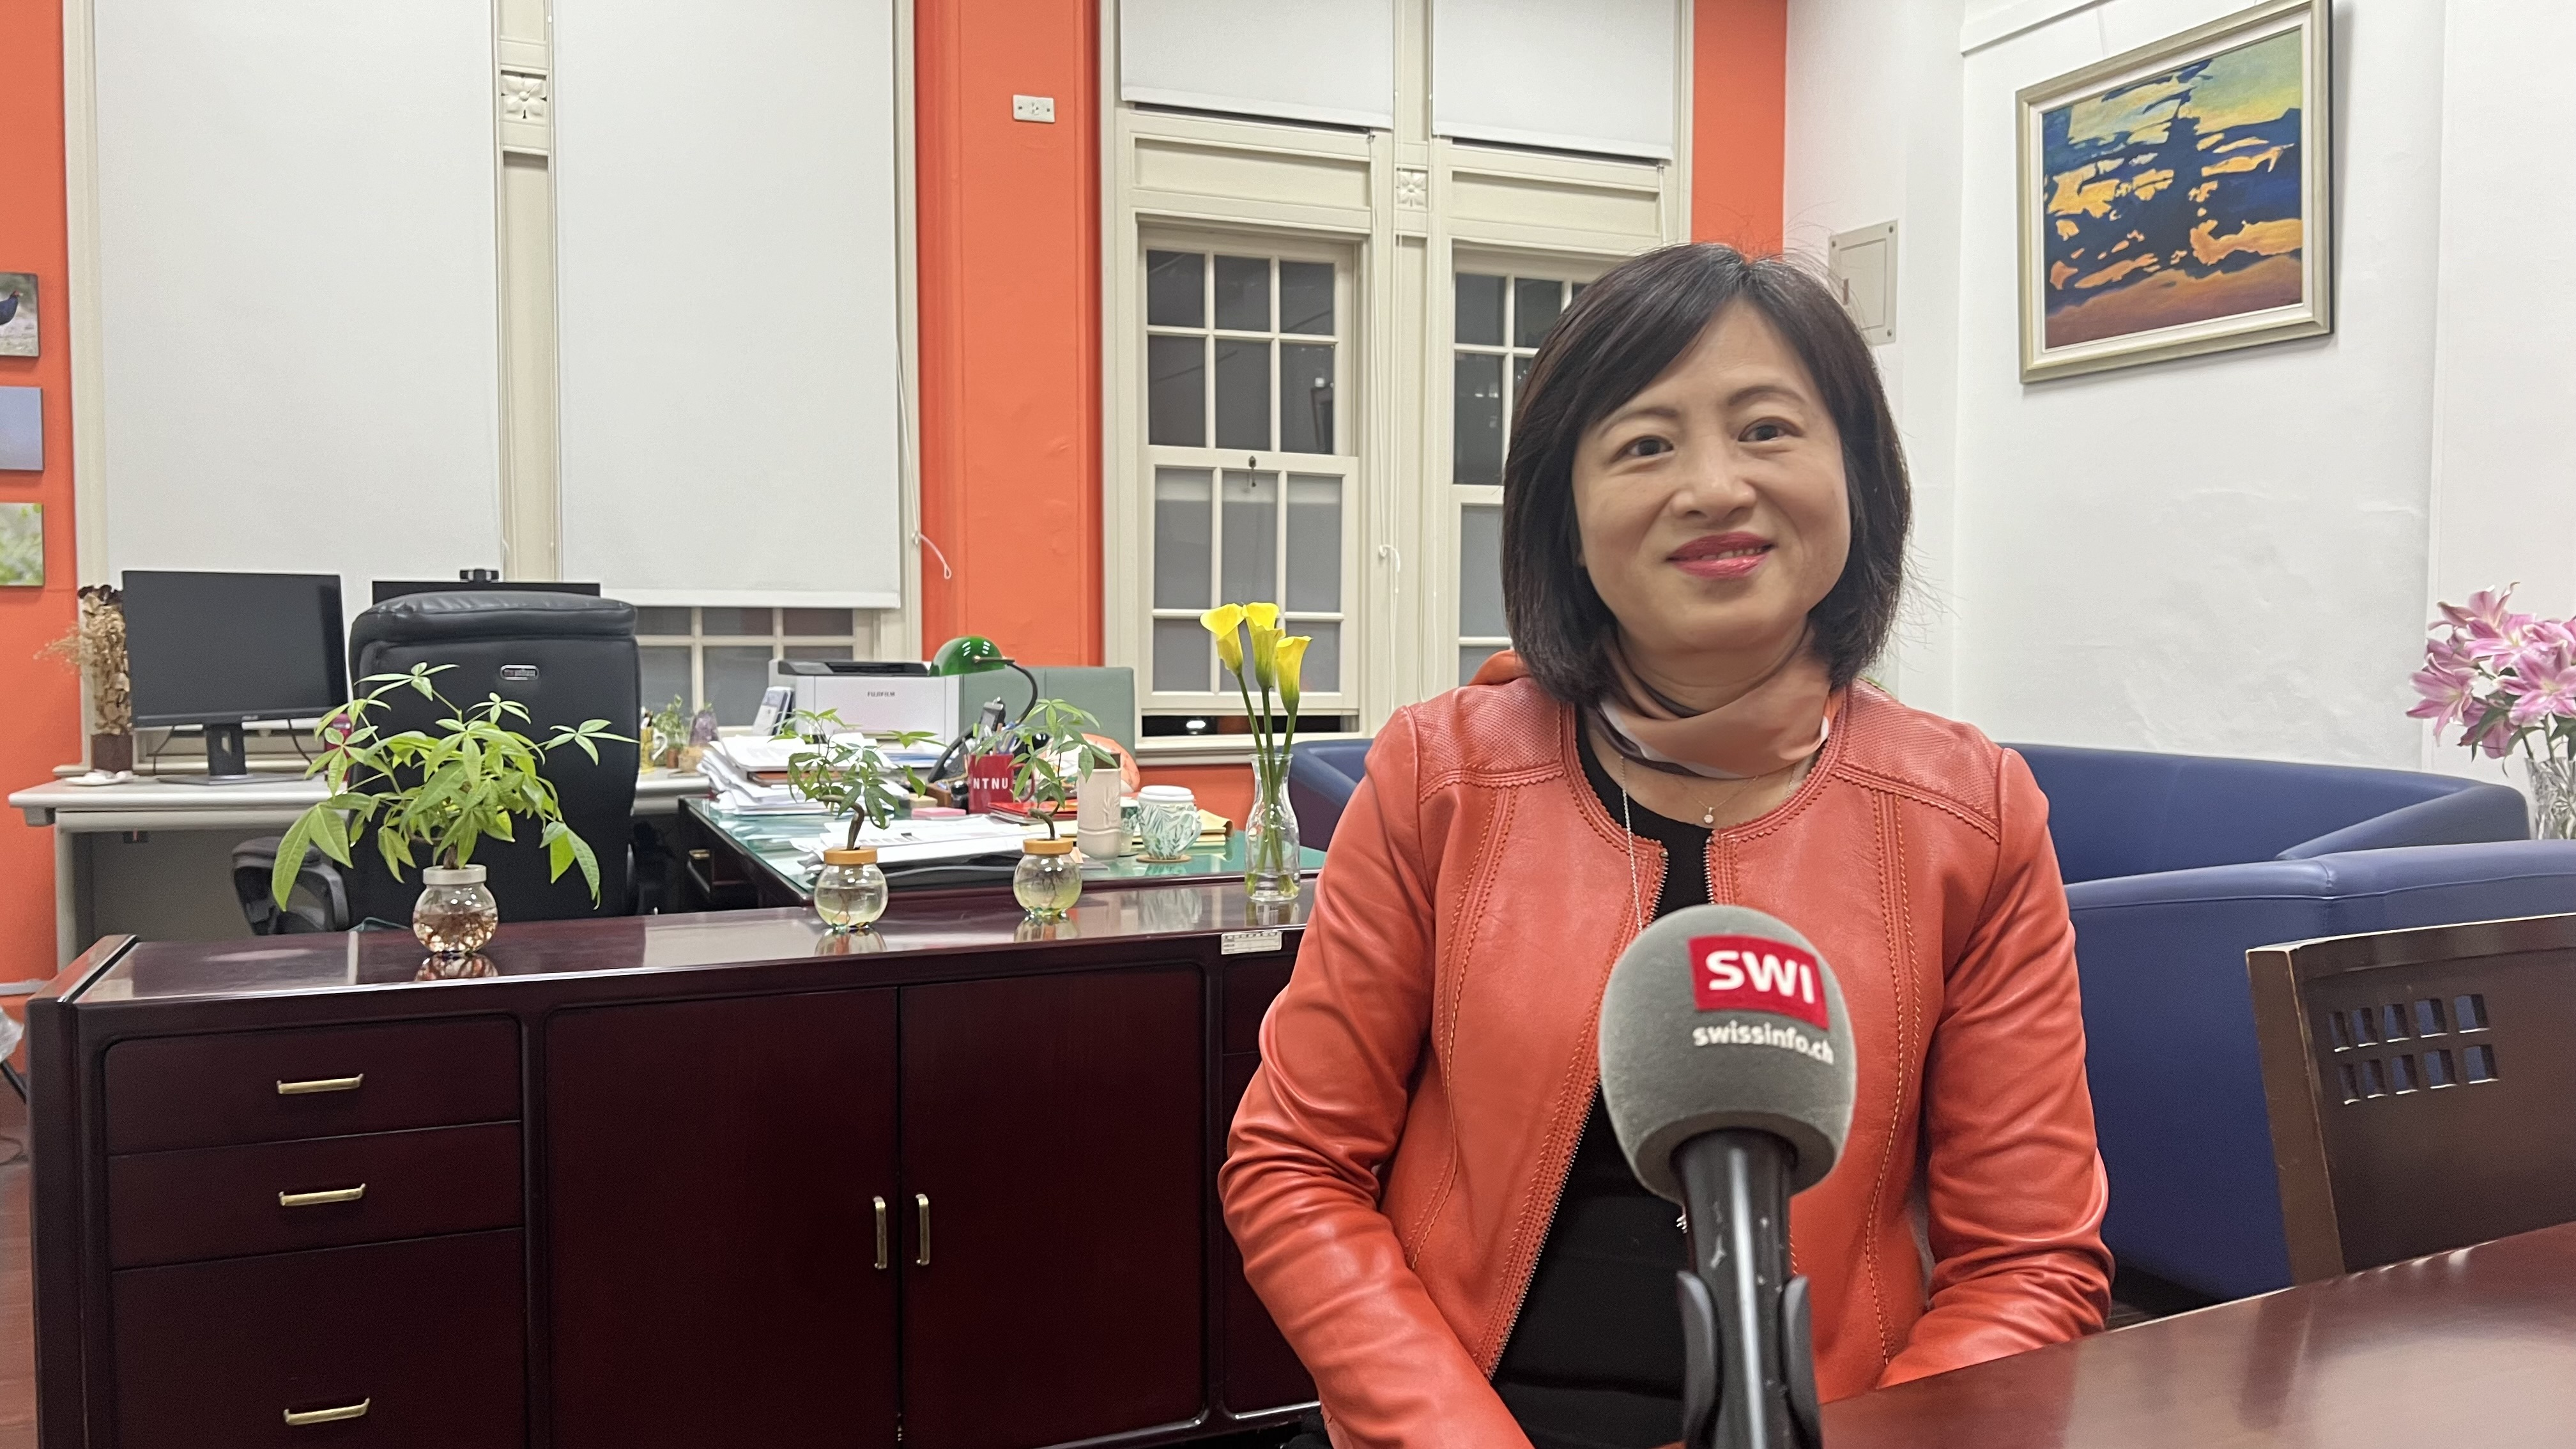 Mei-hui Liu is Professor at the Department of Education at the National Taiwan Normal University in Taipei.